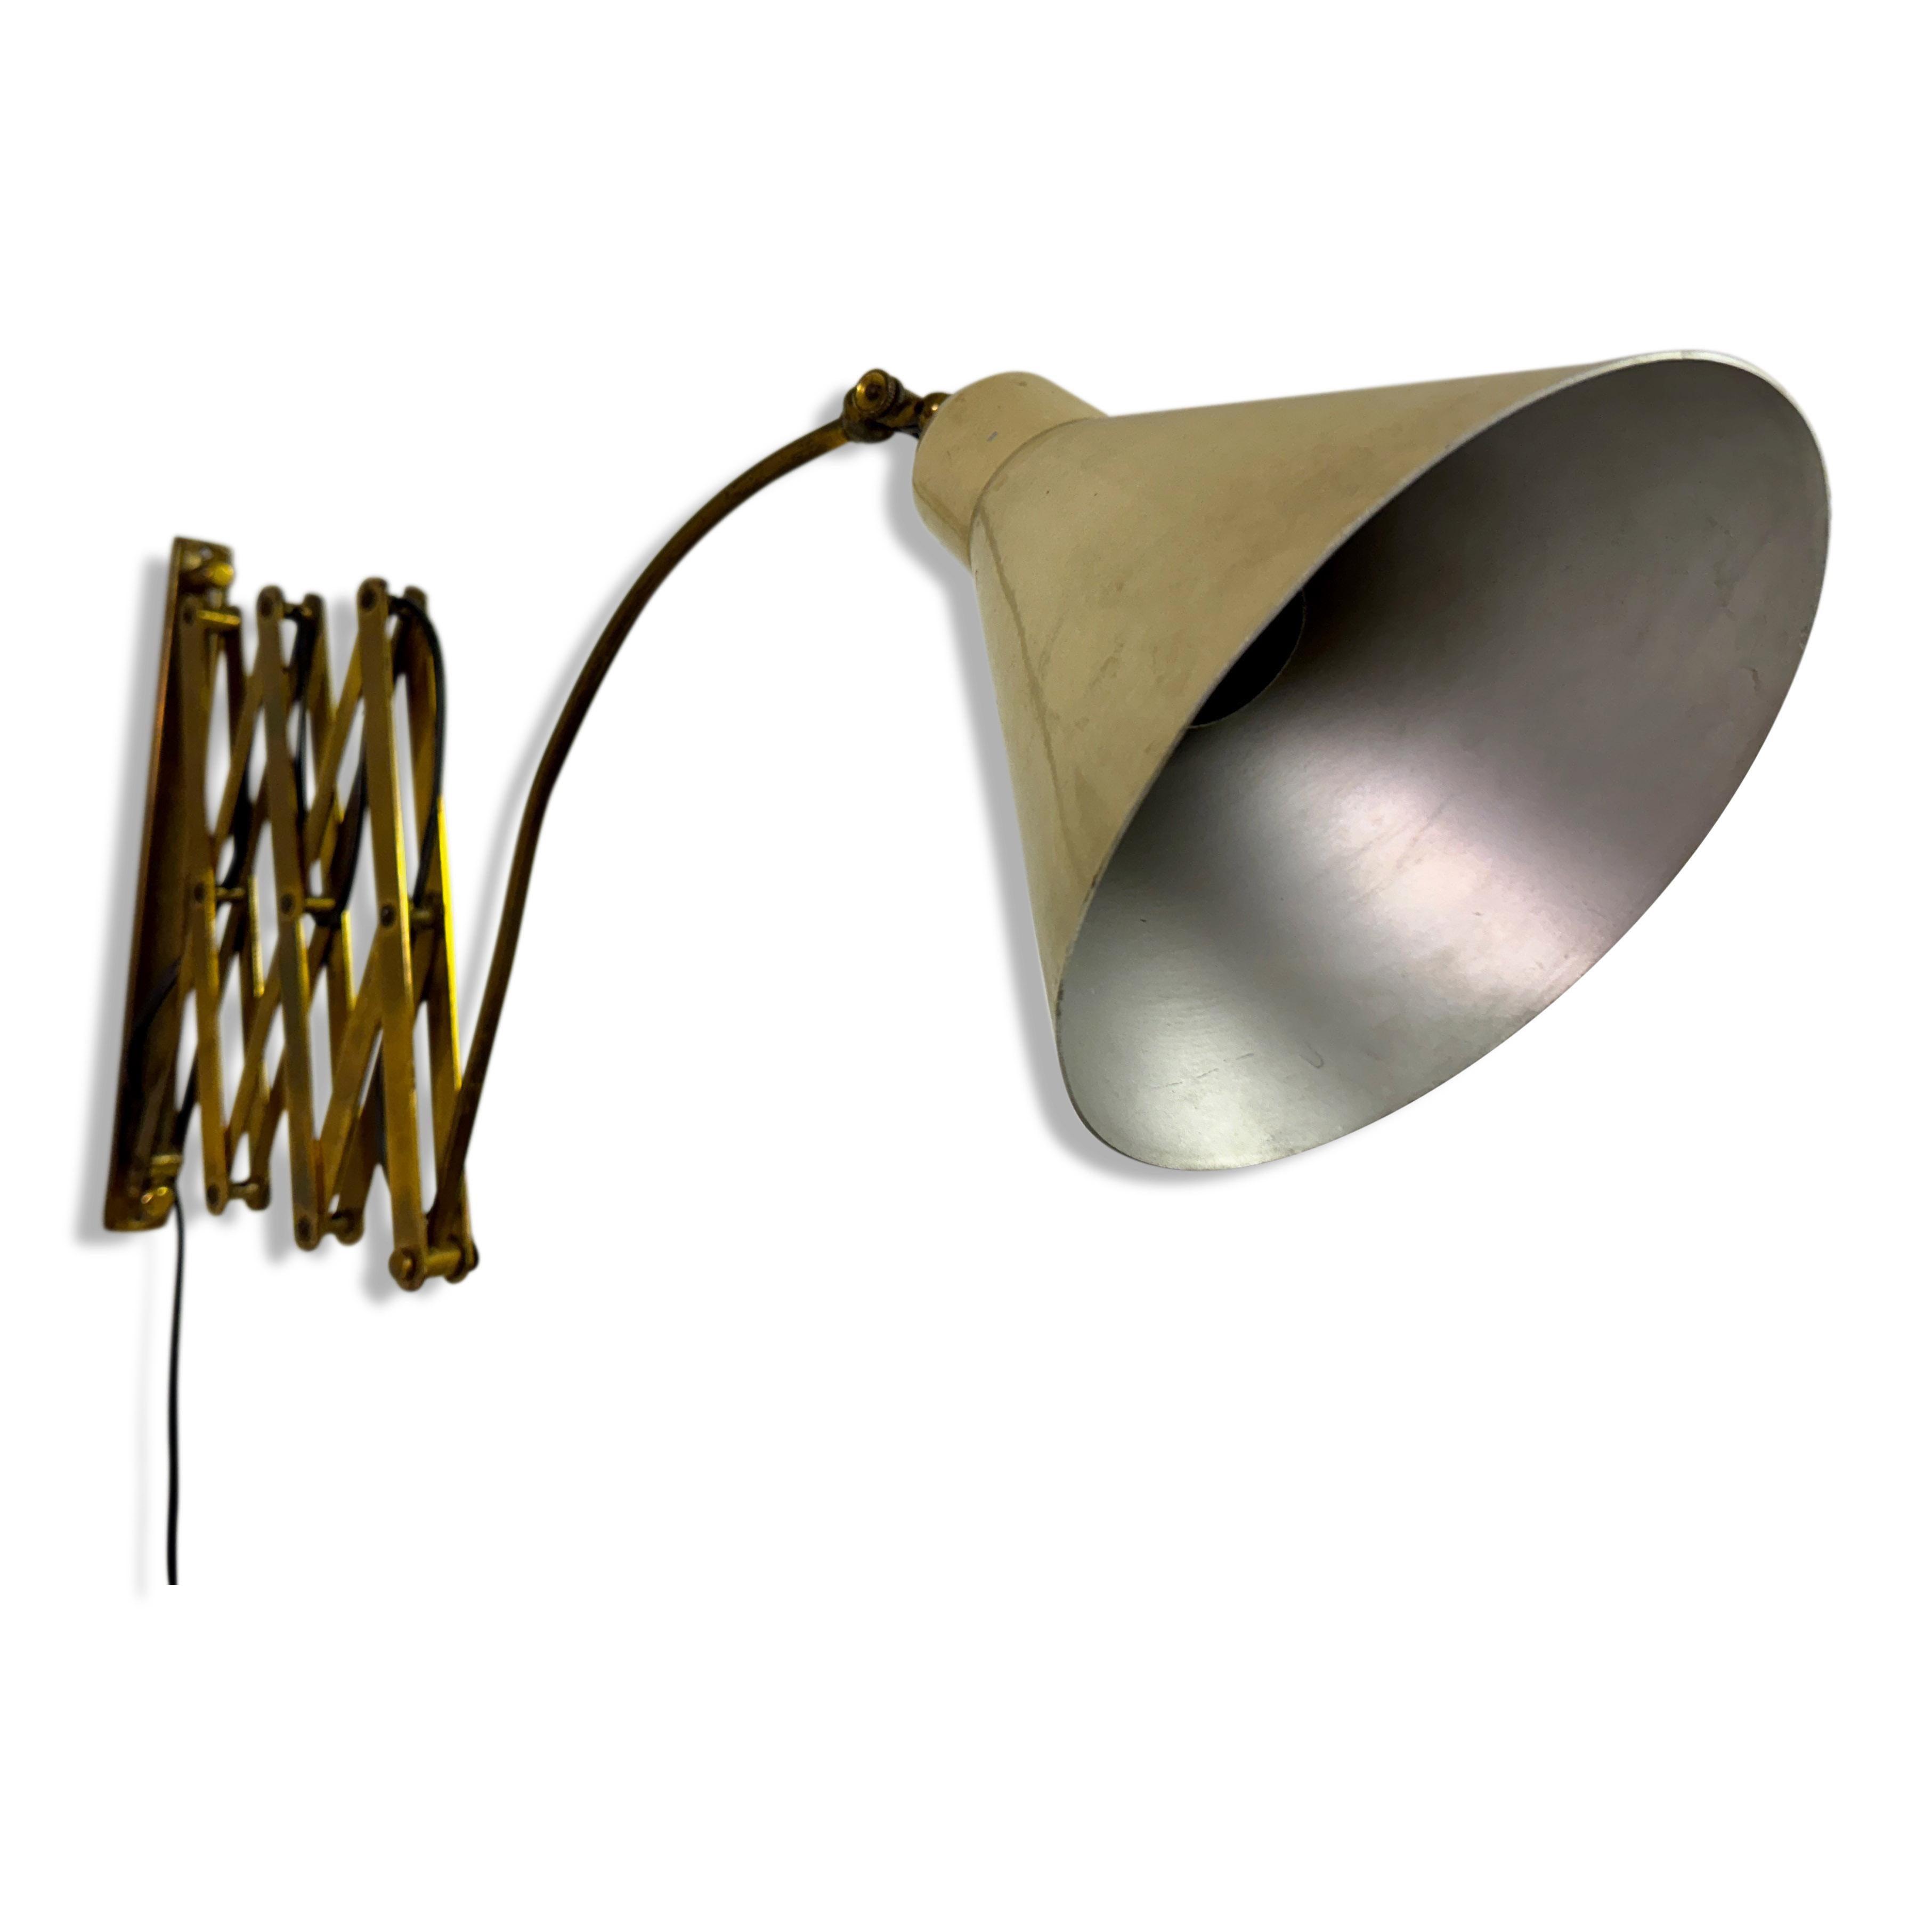 Wall lamp

Brass 

Enamelled metal shade

Concertina 

Adjustable shade

Rewired

Extends to 110cm

1950s Italian